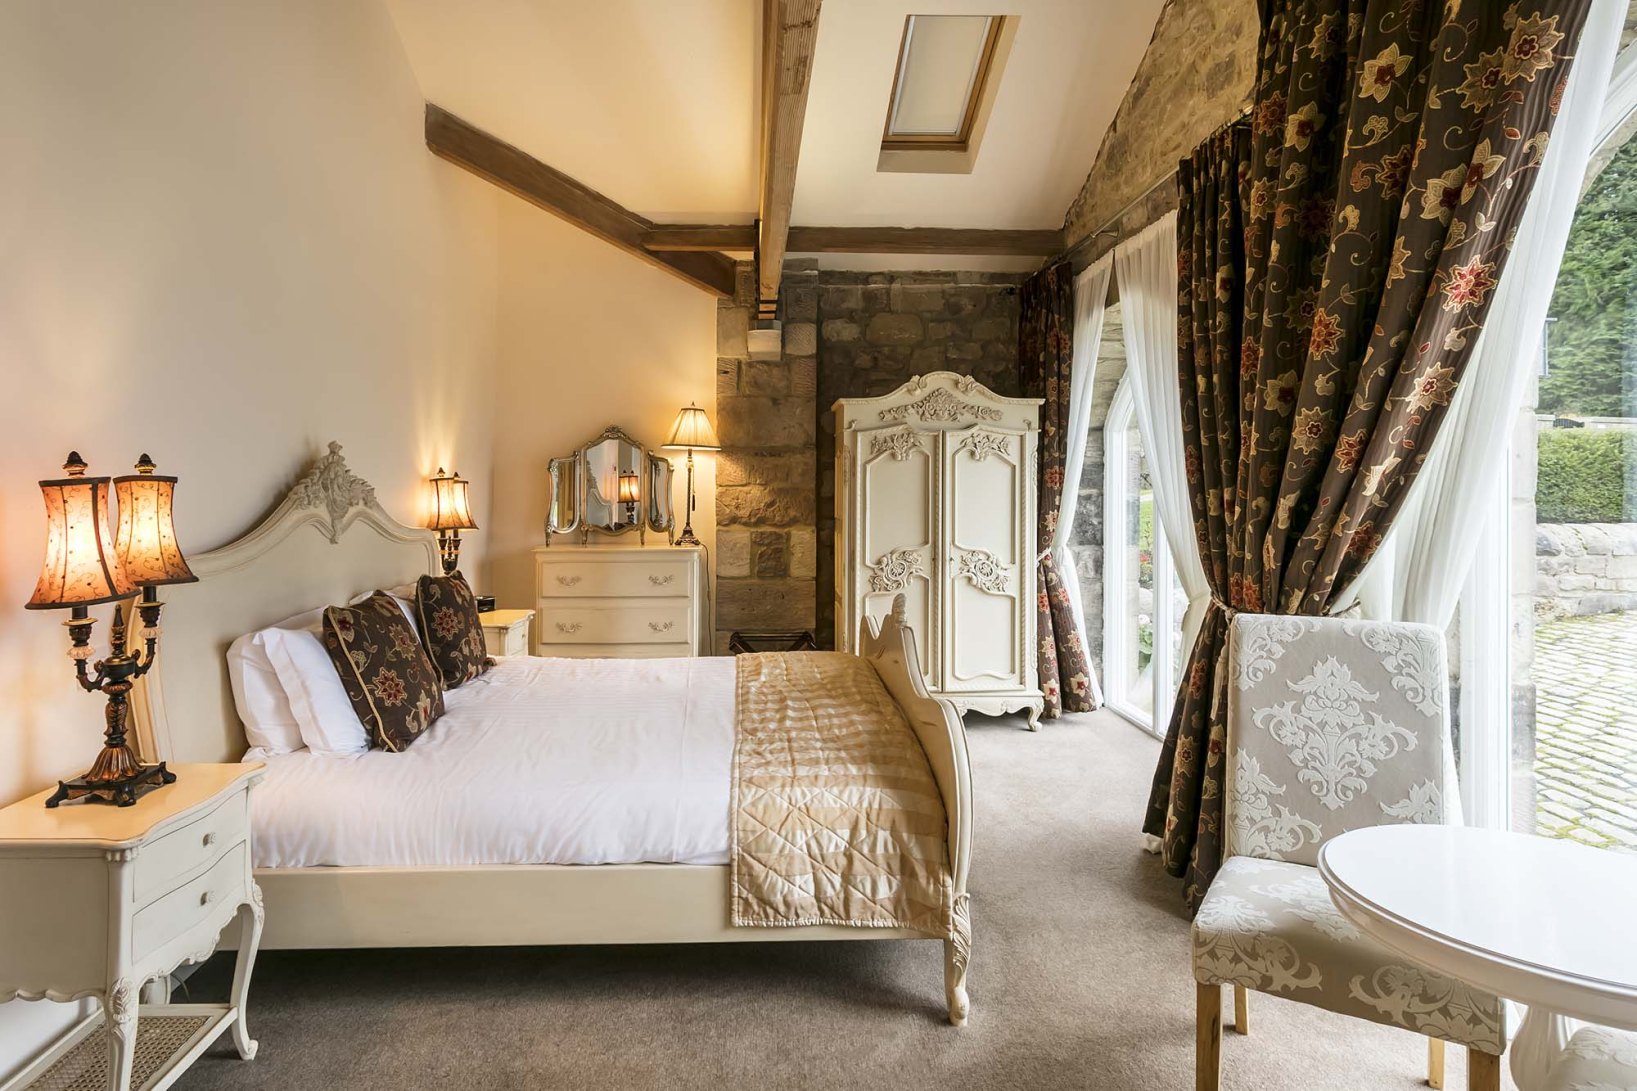 The Spa Hotel Review: Doxford Hall Hotel & Spa, Northumberland, UK 